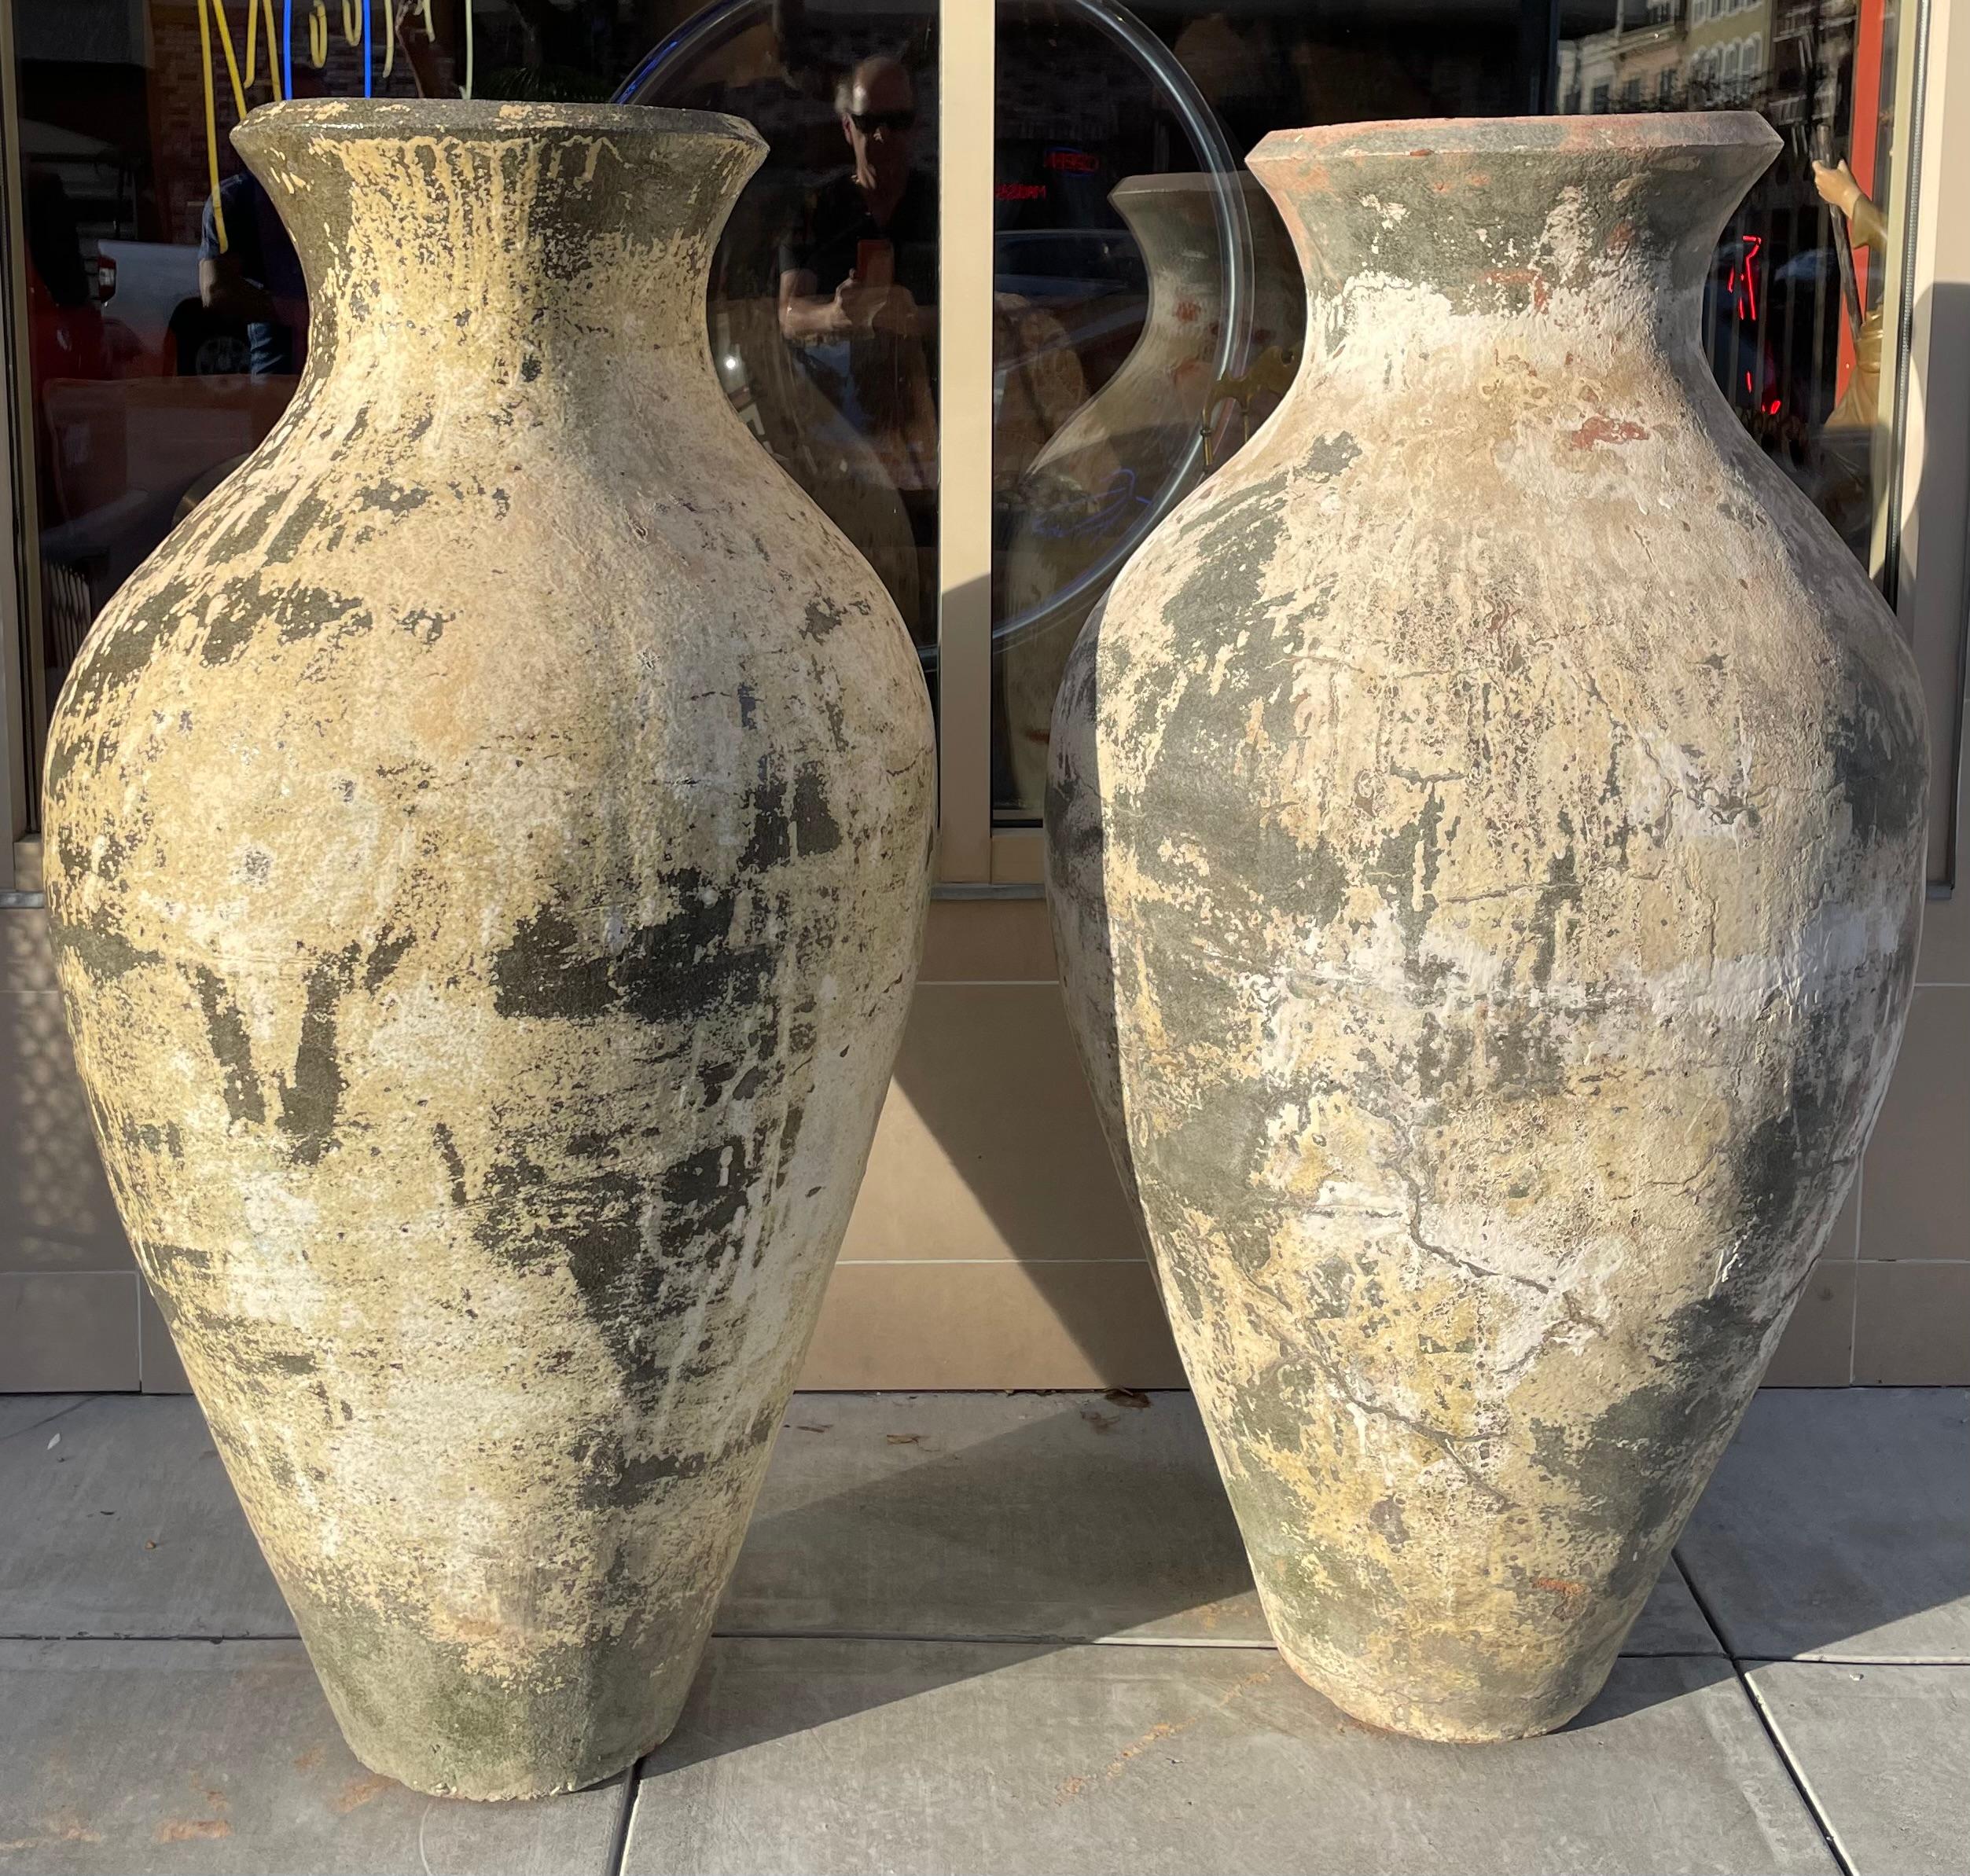 The commanding scale of these extra large Thai vessels makes them ideal statement pieces for either indoor or outdoor use. The pots are contemporary and are cast in iconic old world shapes, and then through a series of chemical applications, they